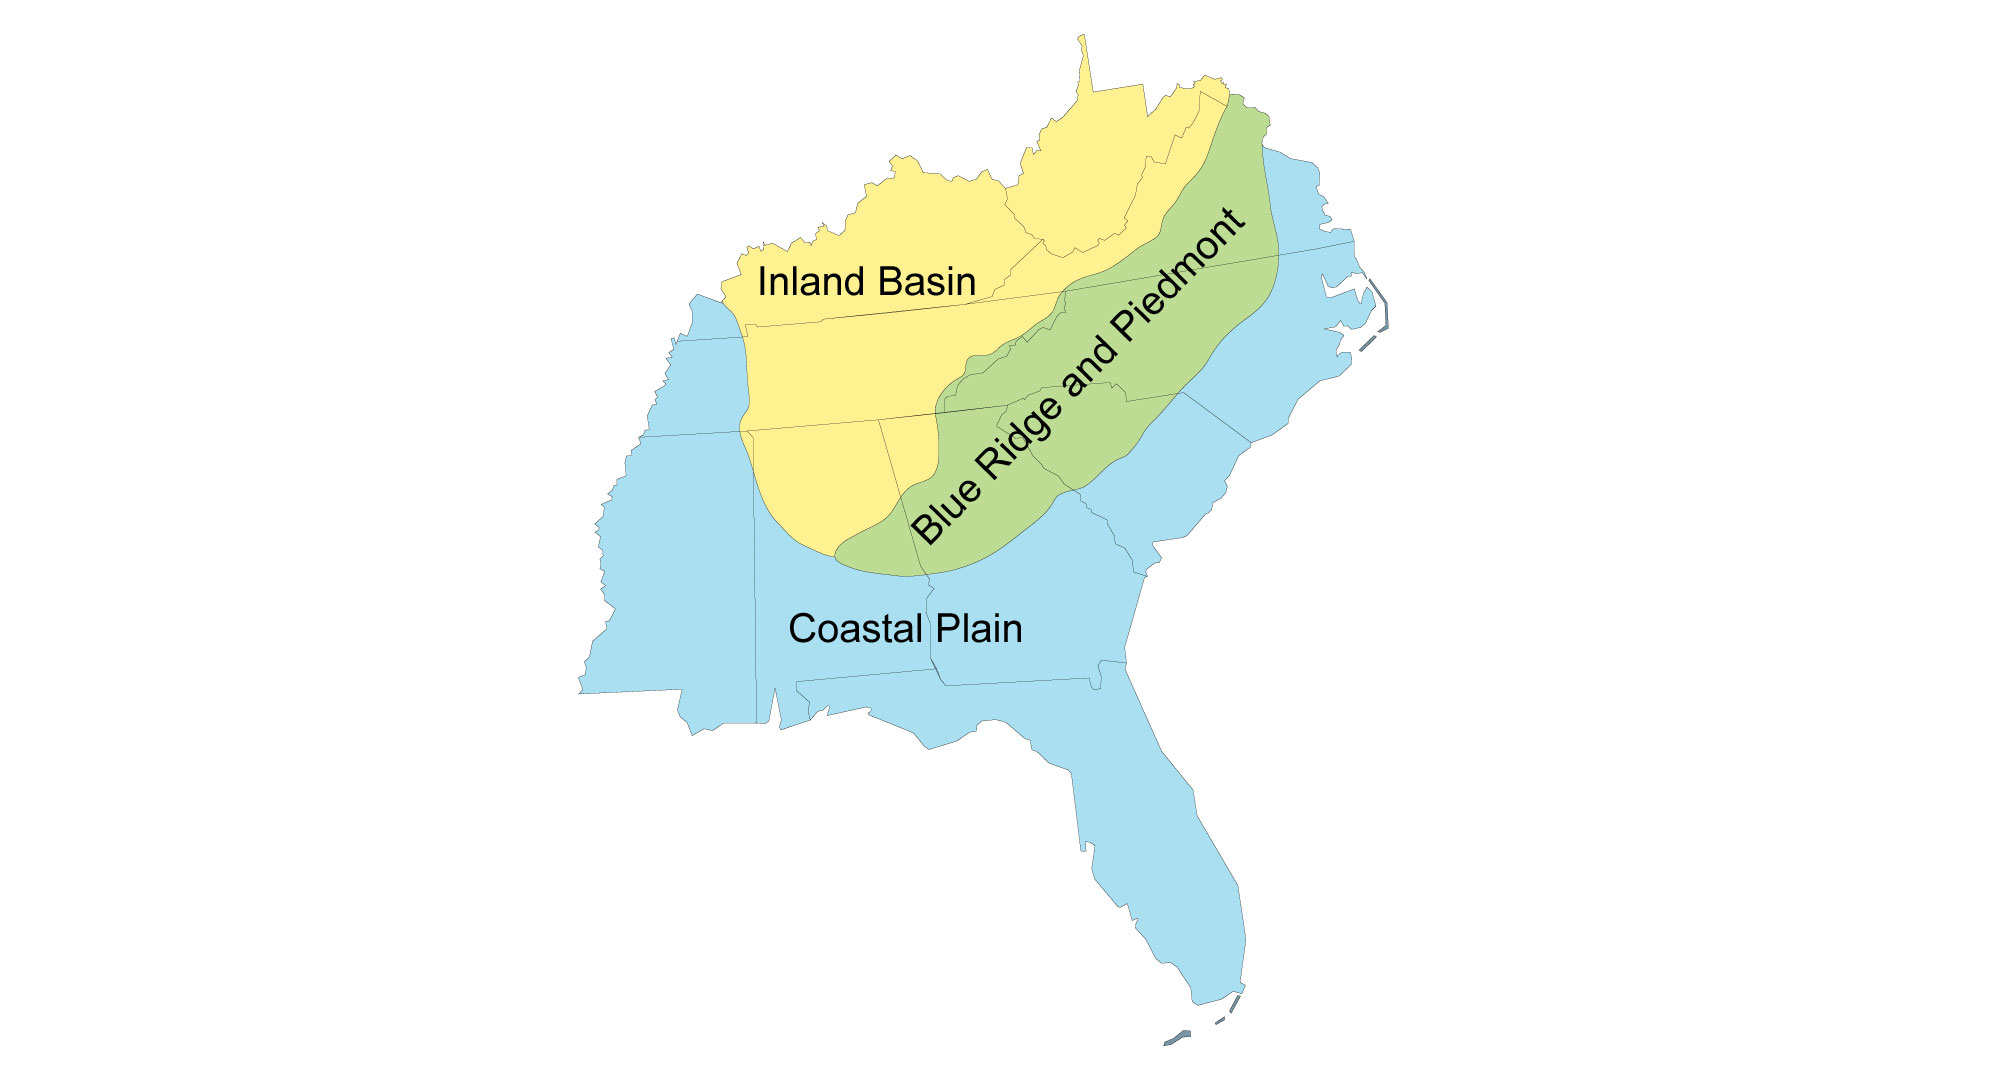 Map of northeastern U.S. states with five different regions identified.